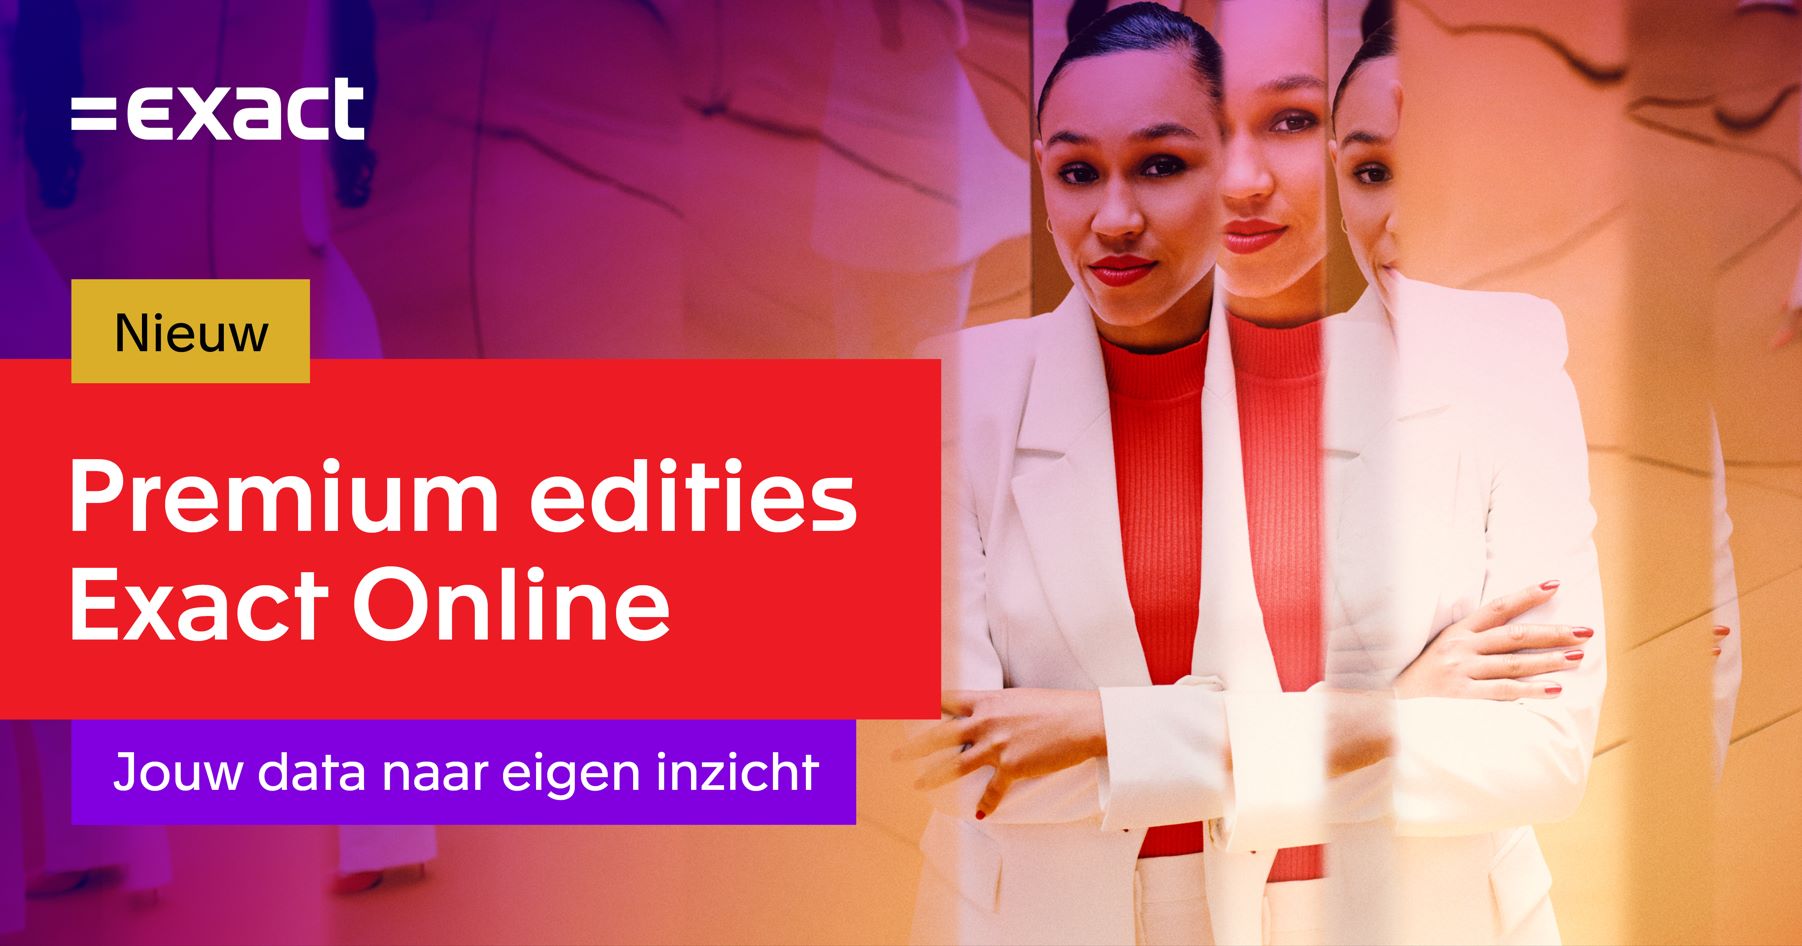 Exact presents Premium editions of Exact Online for more flexibility and enhanced functionality